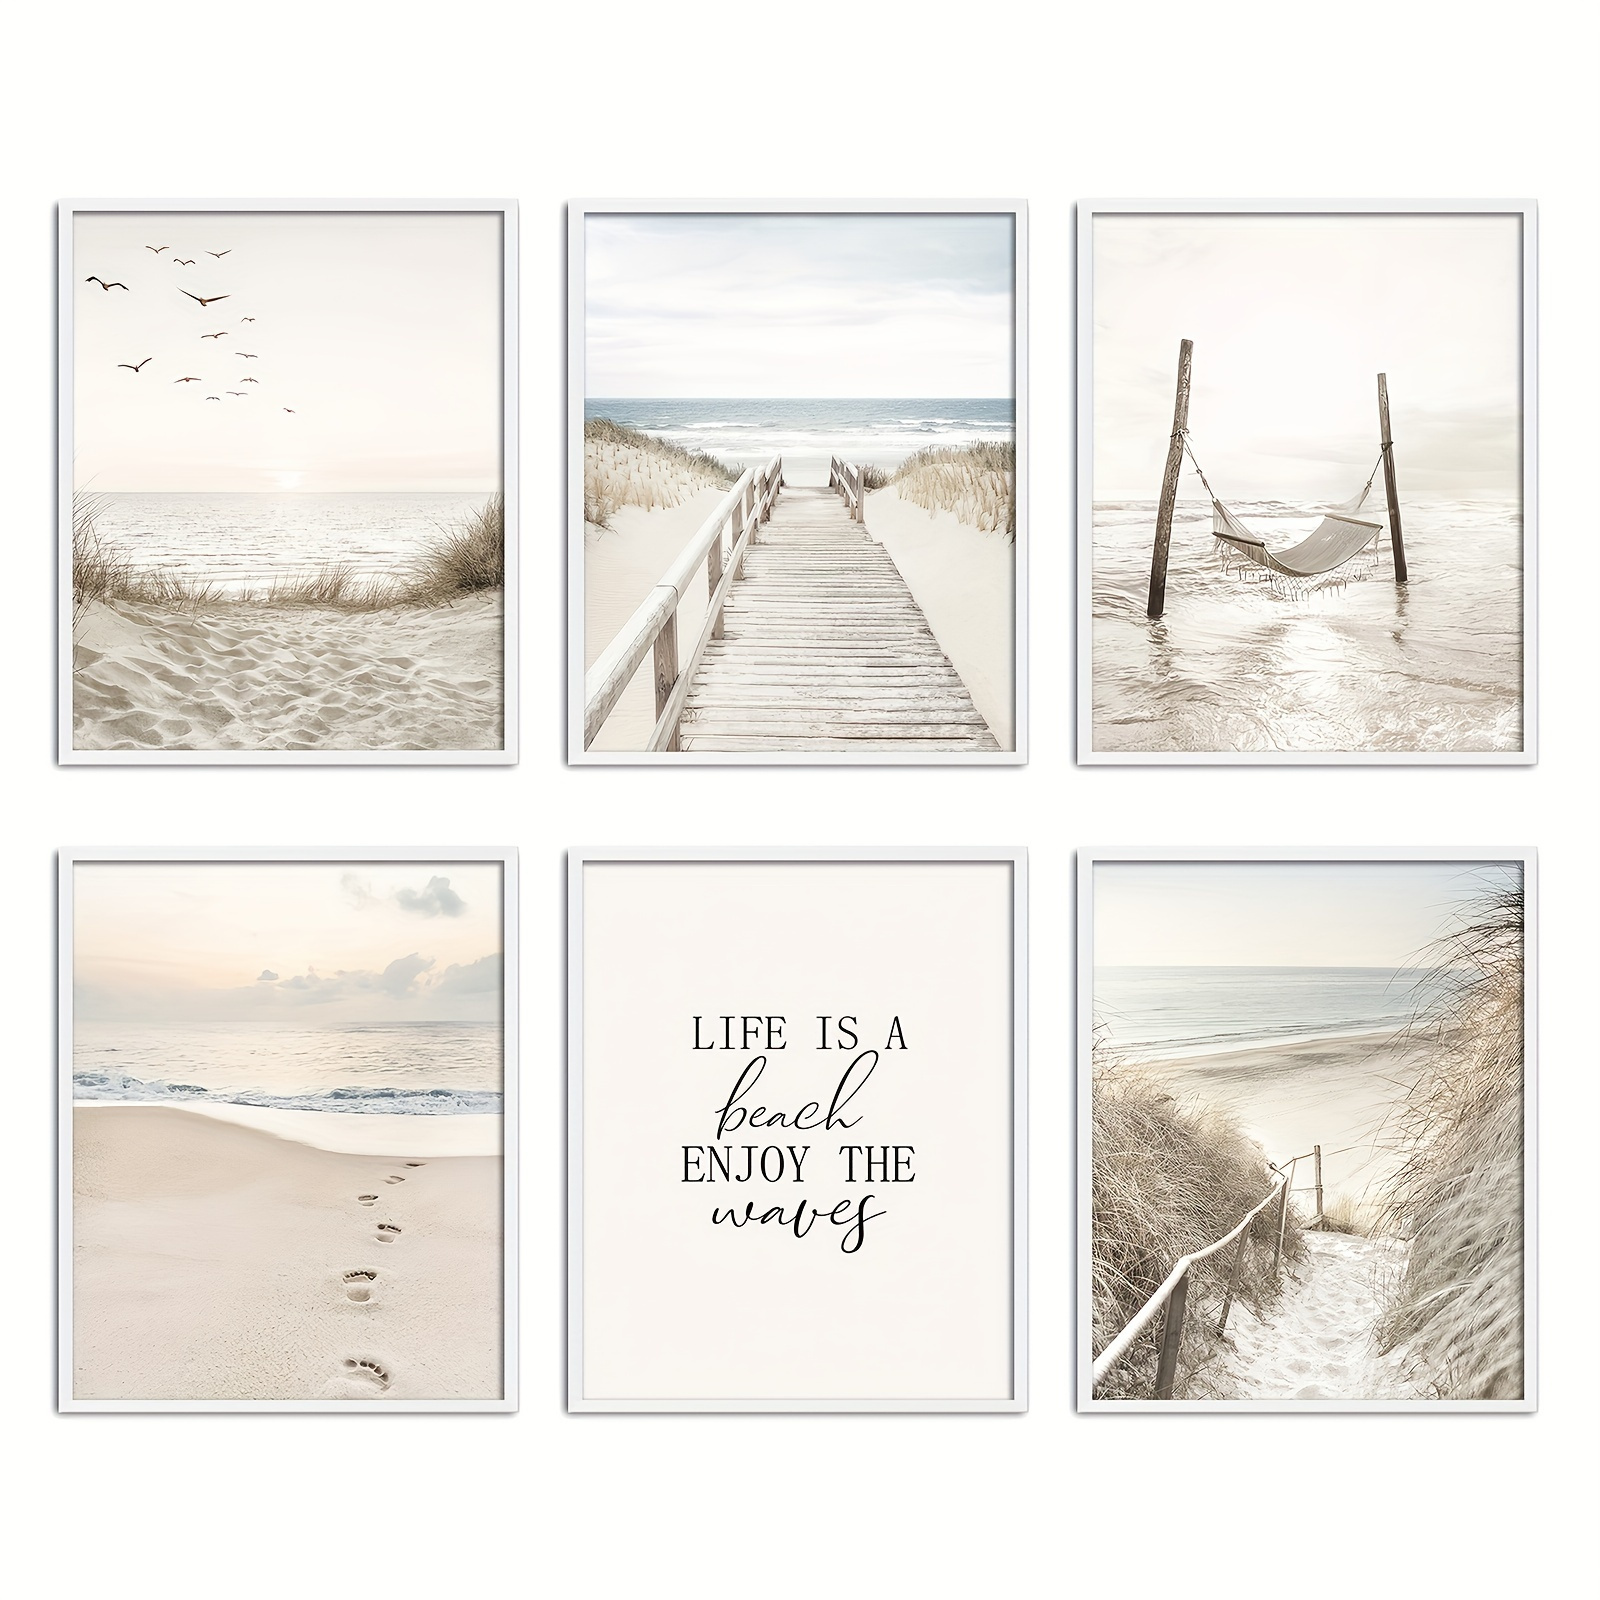 

Beige Nature Scenery Canvas Wall Art Bedroom, Sunset Seaside Pictures For Living Room Wall Decoration, Beach Wall Art Pictures, 6pcs, For Living Room Wall Decoration (8x10 Inch/no Frame)